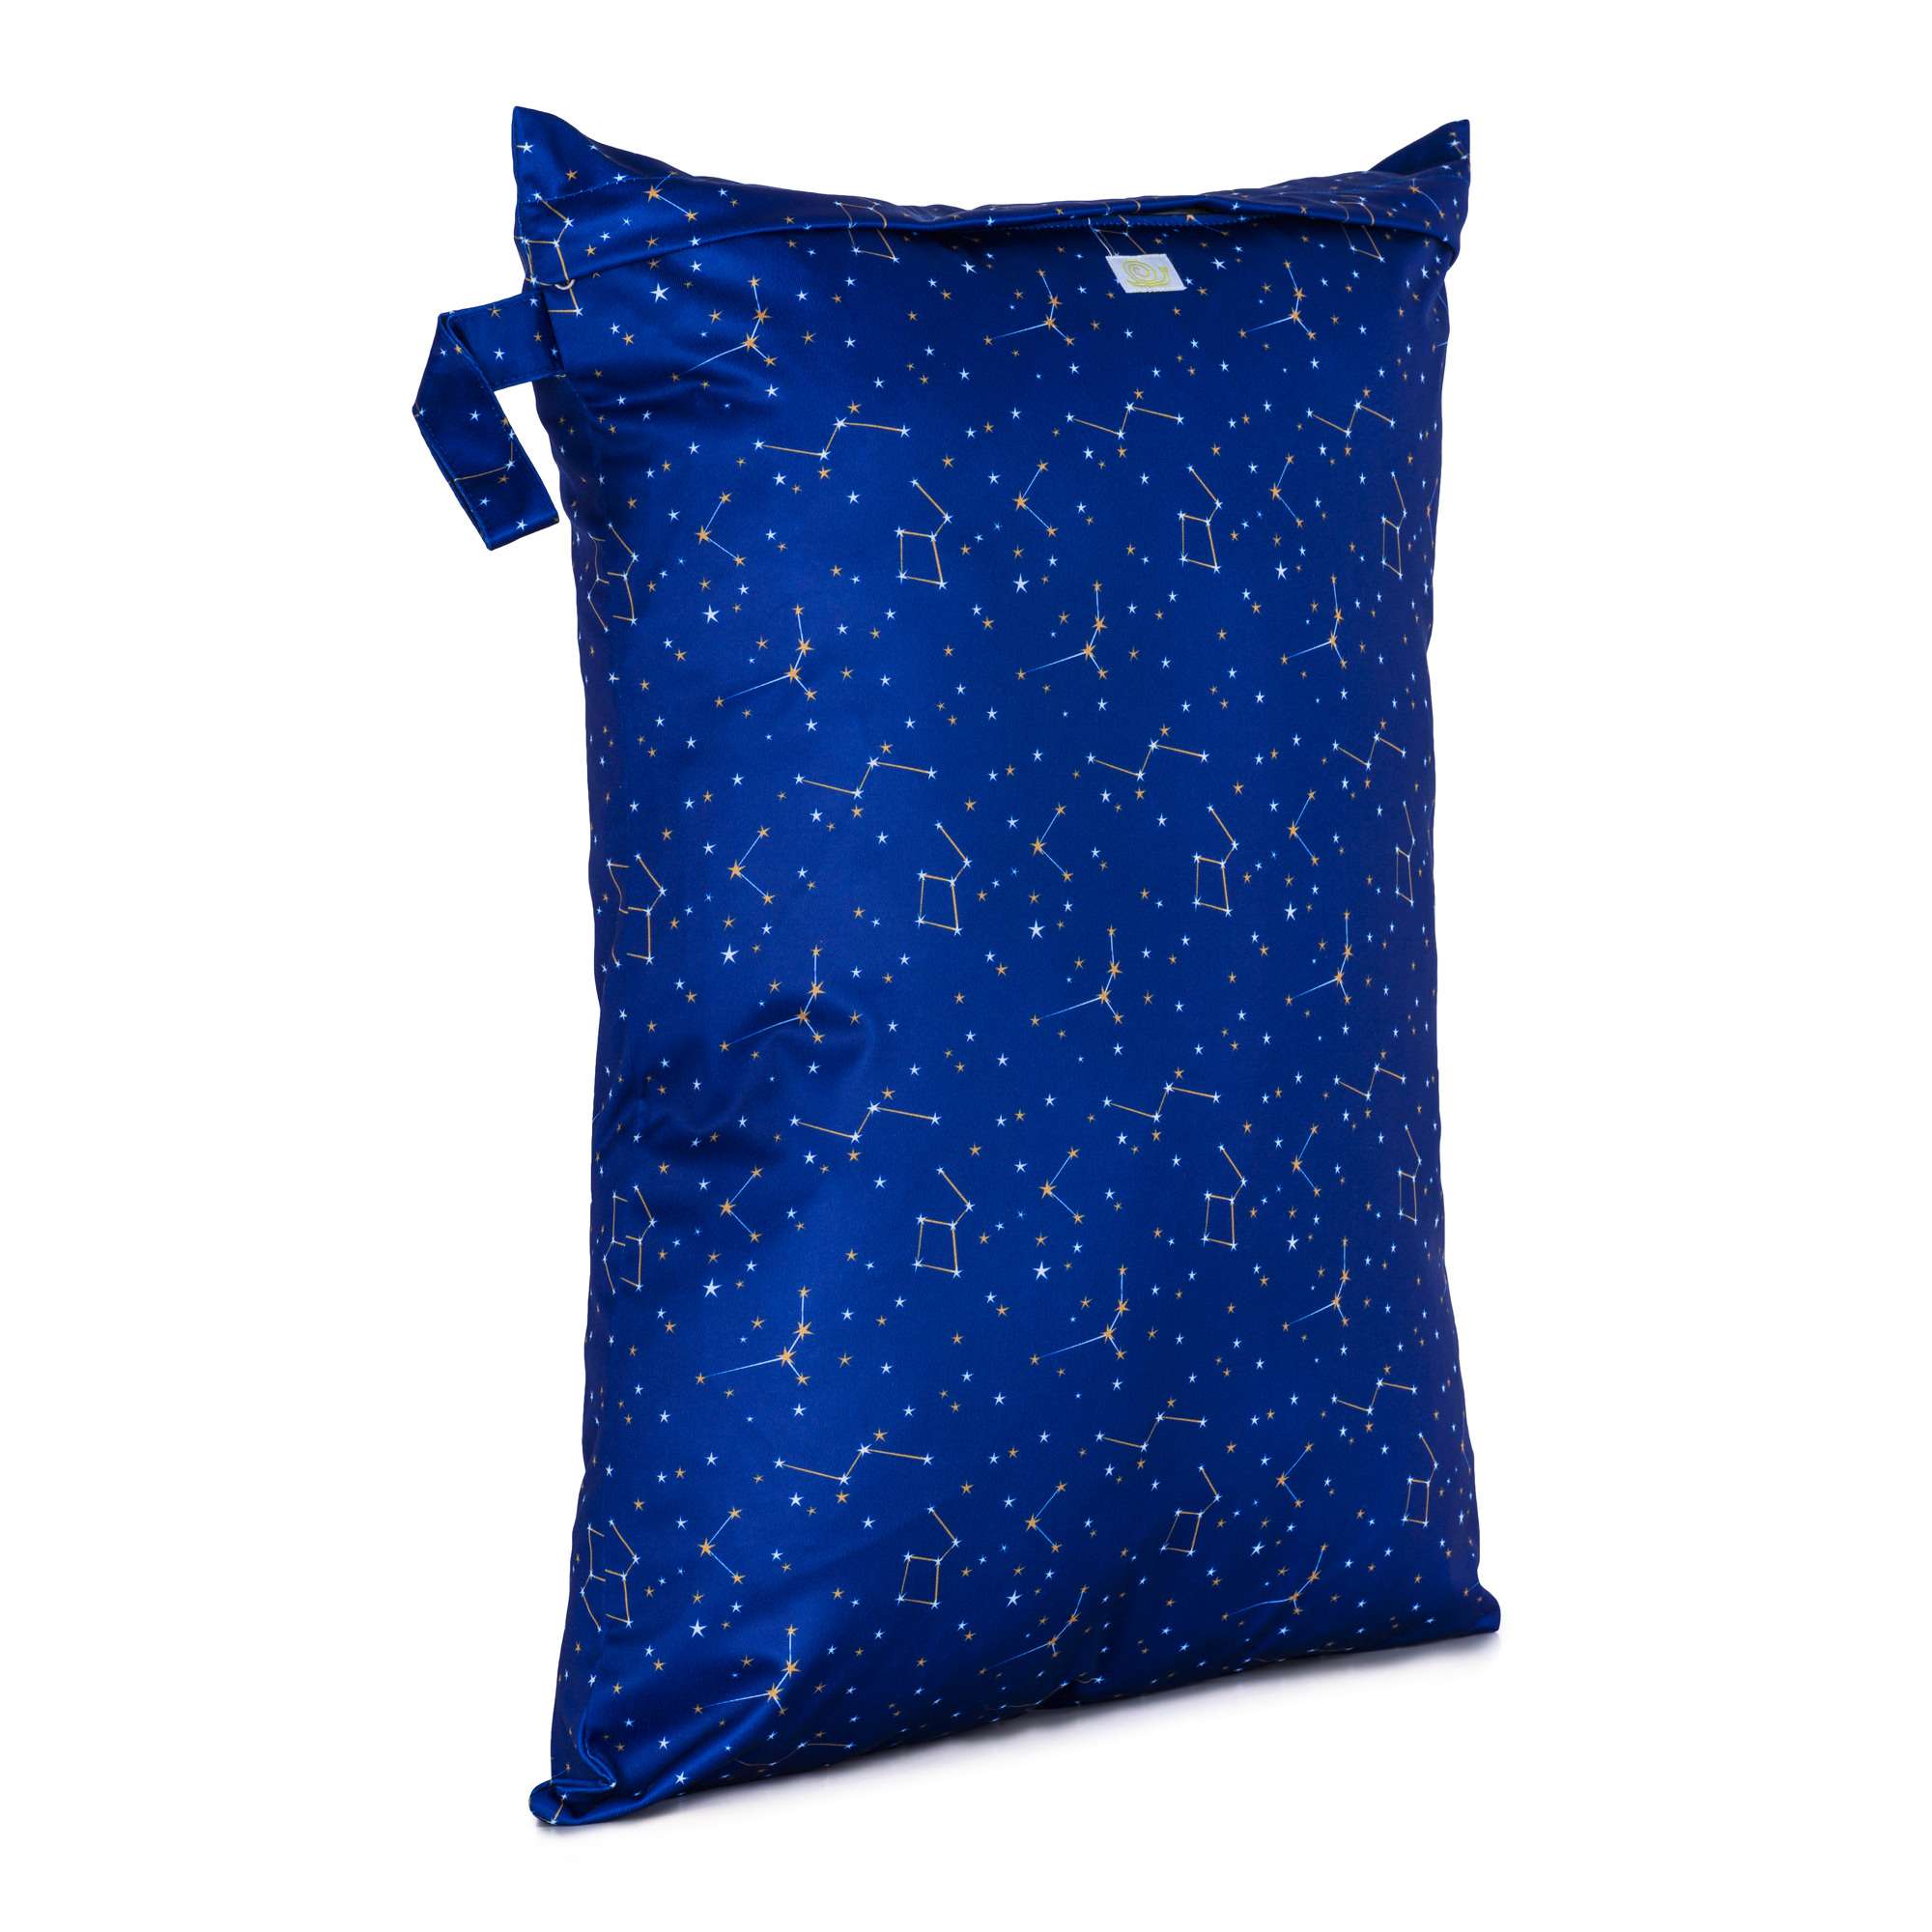 Baba+Boo Large Nappy Bag Constellations